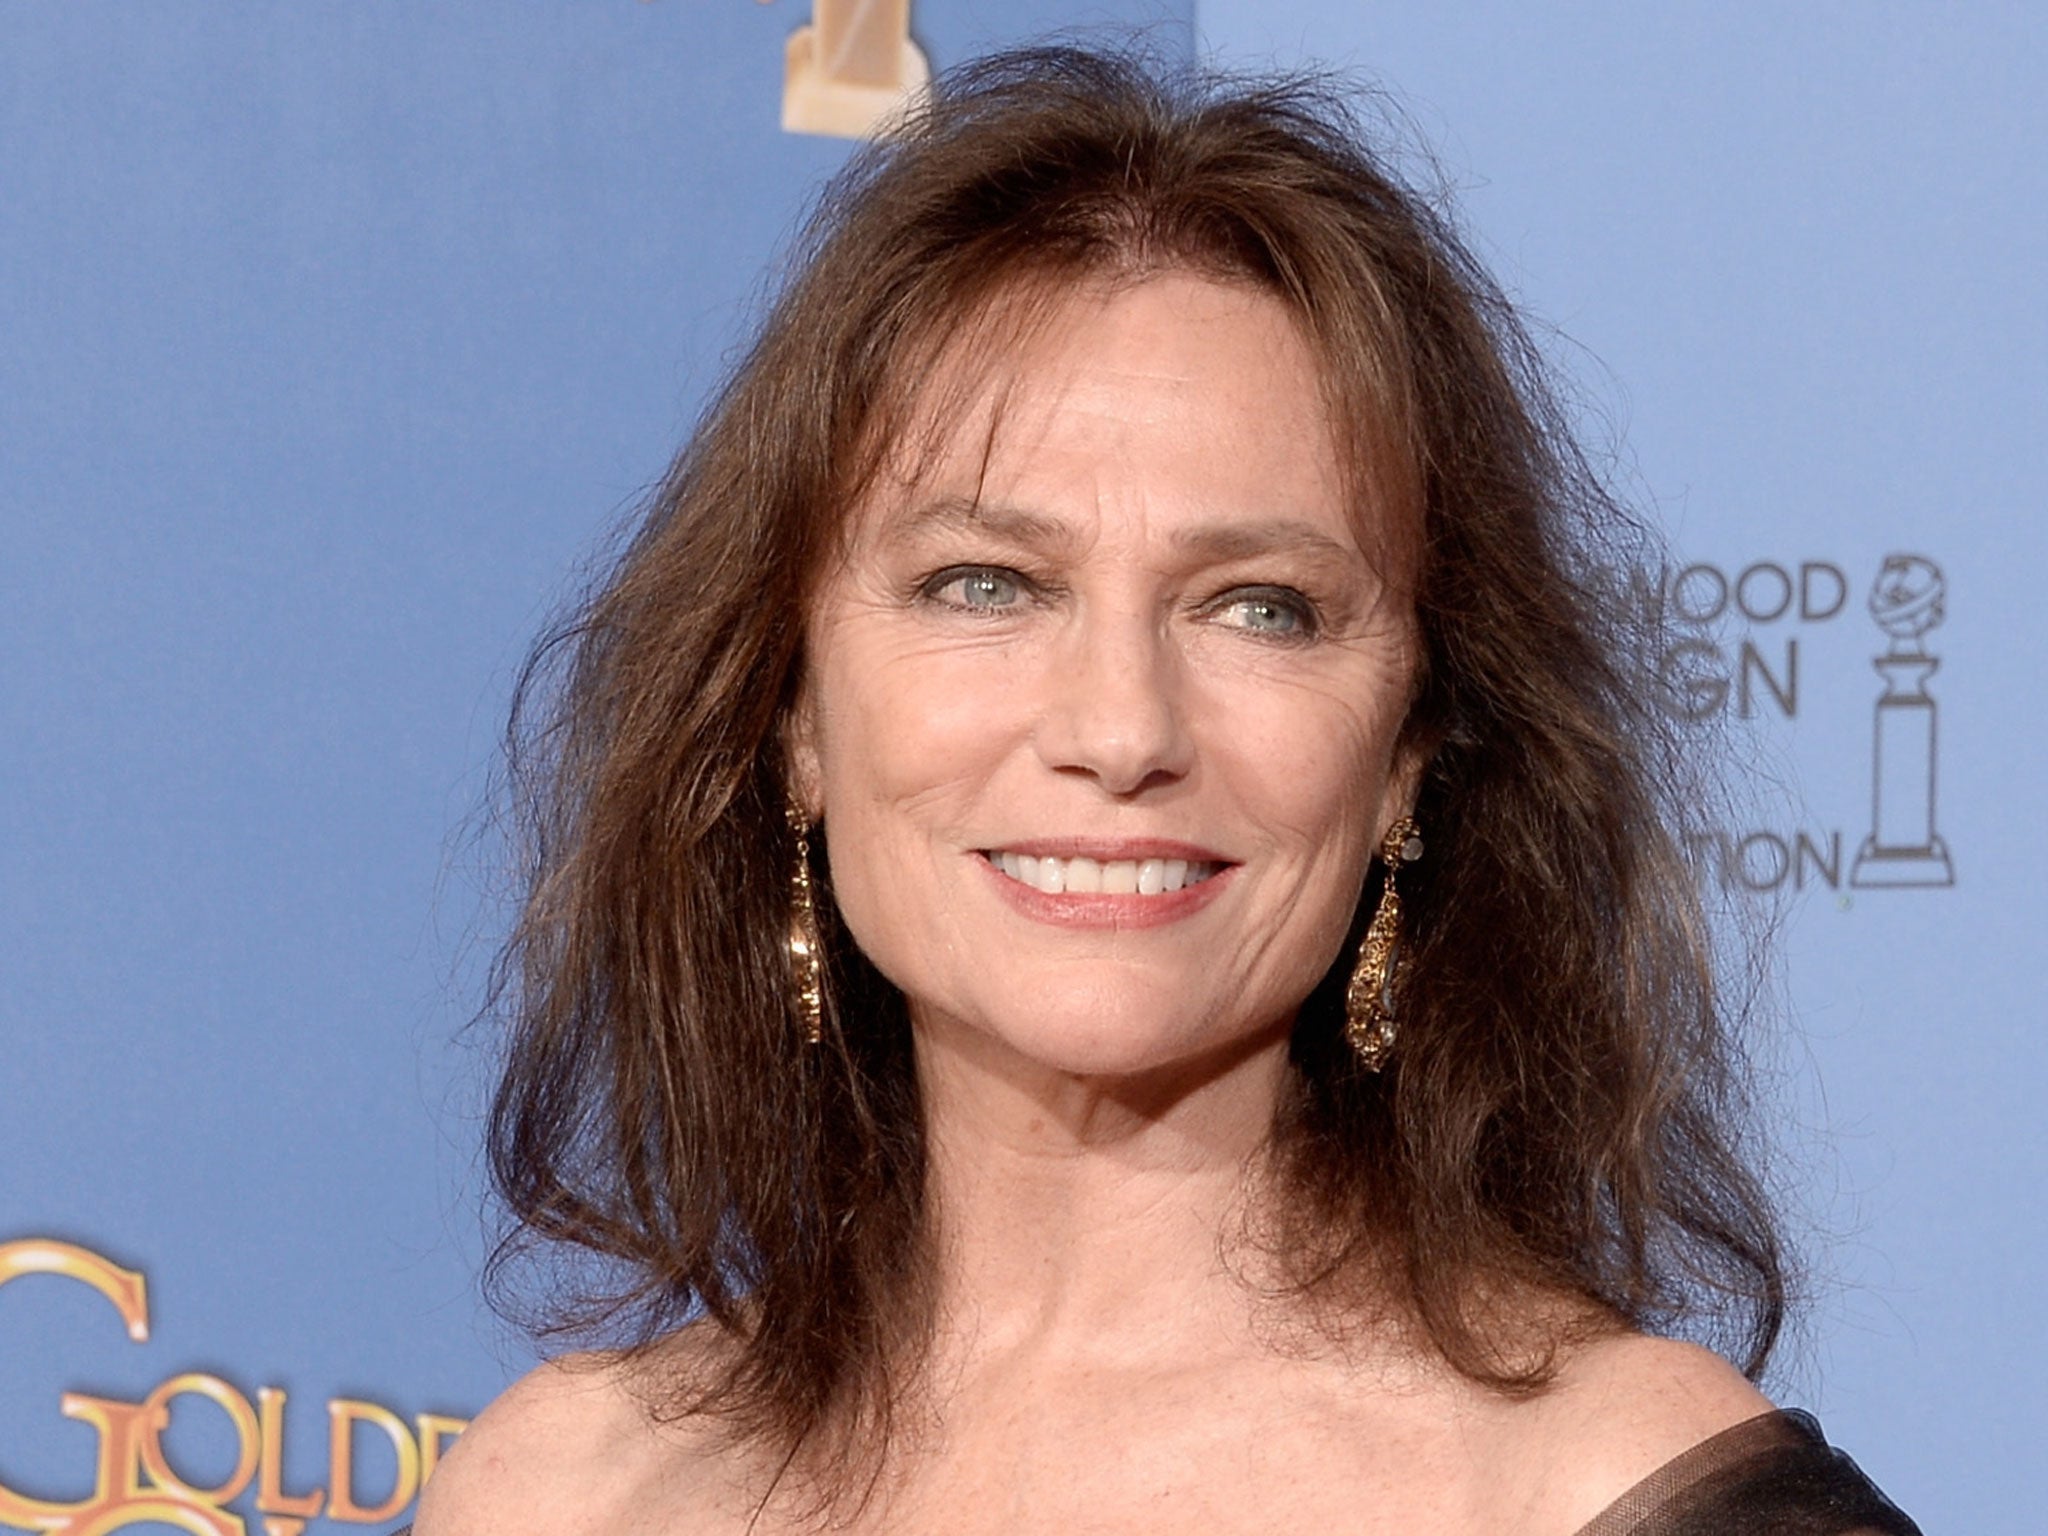 Jacqueline Bisset says men dont want to have sex with older women The Independent The Independent pic